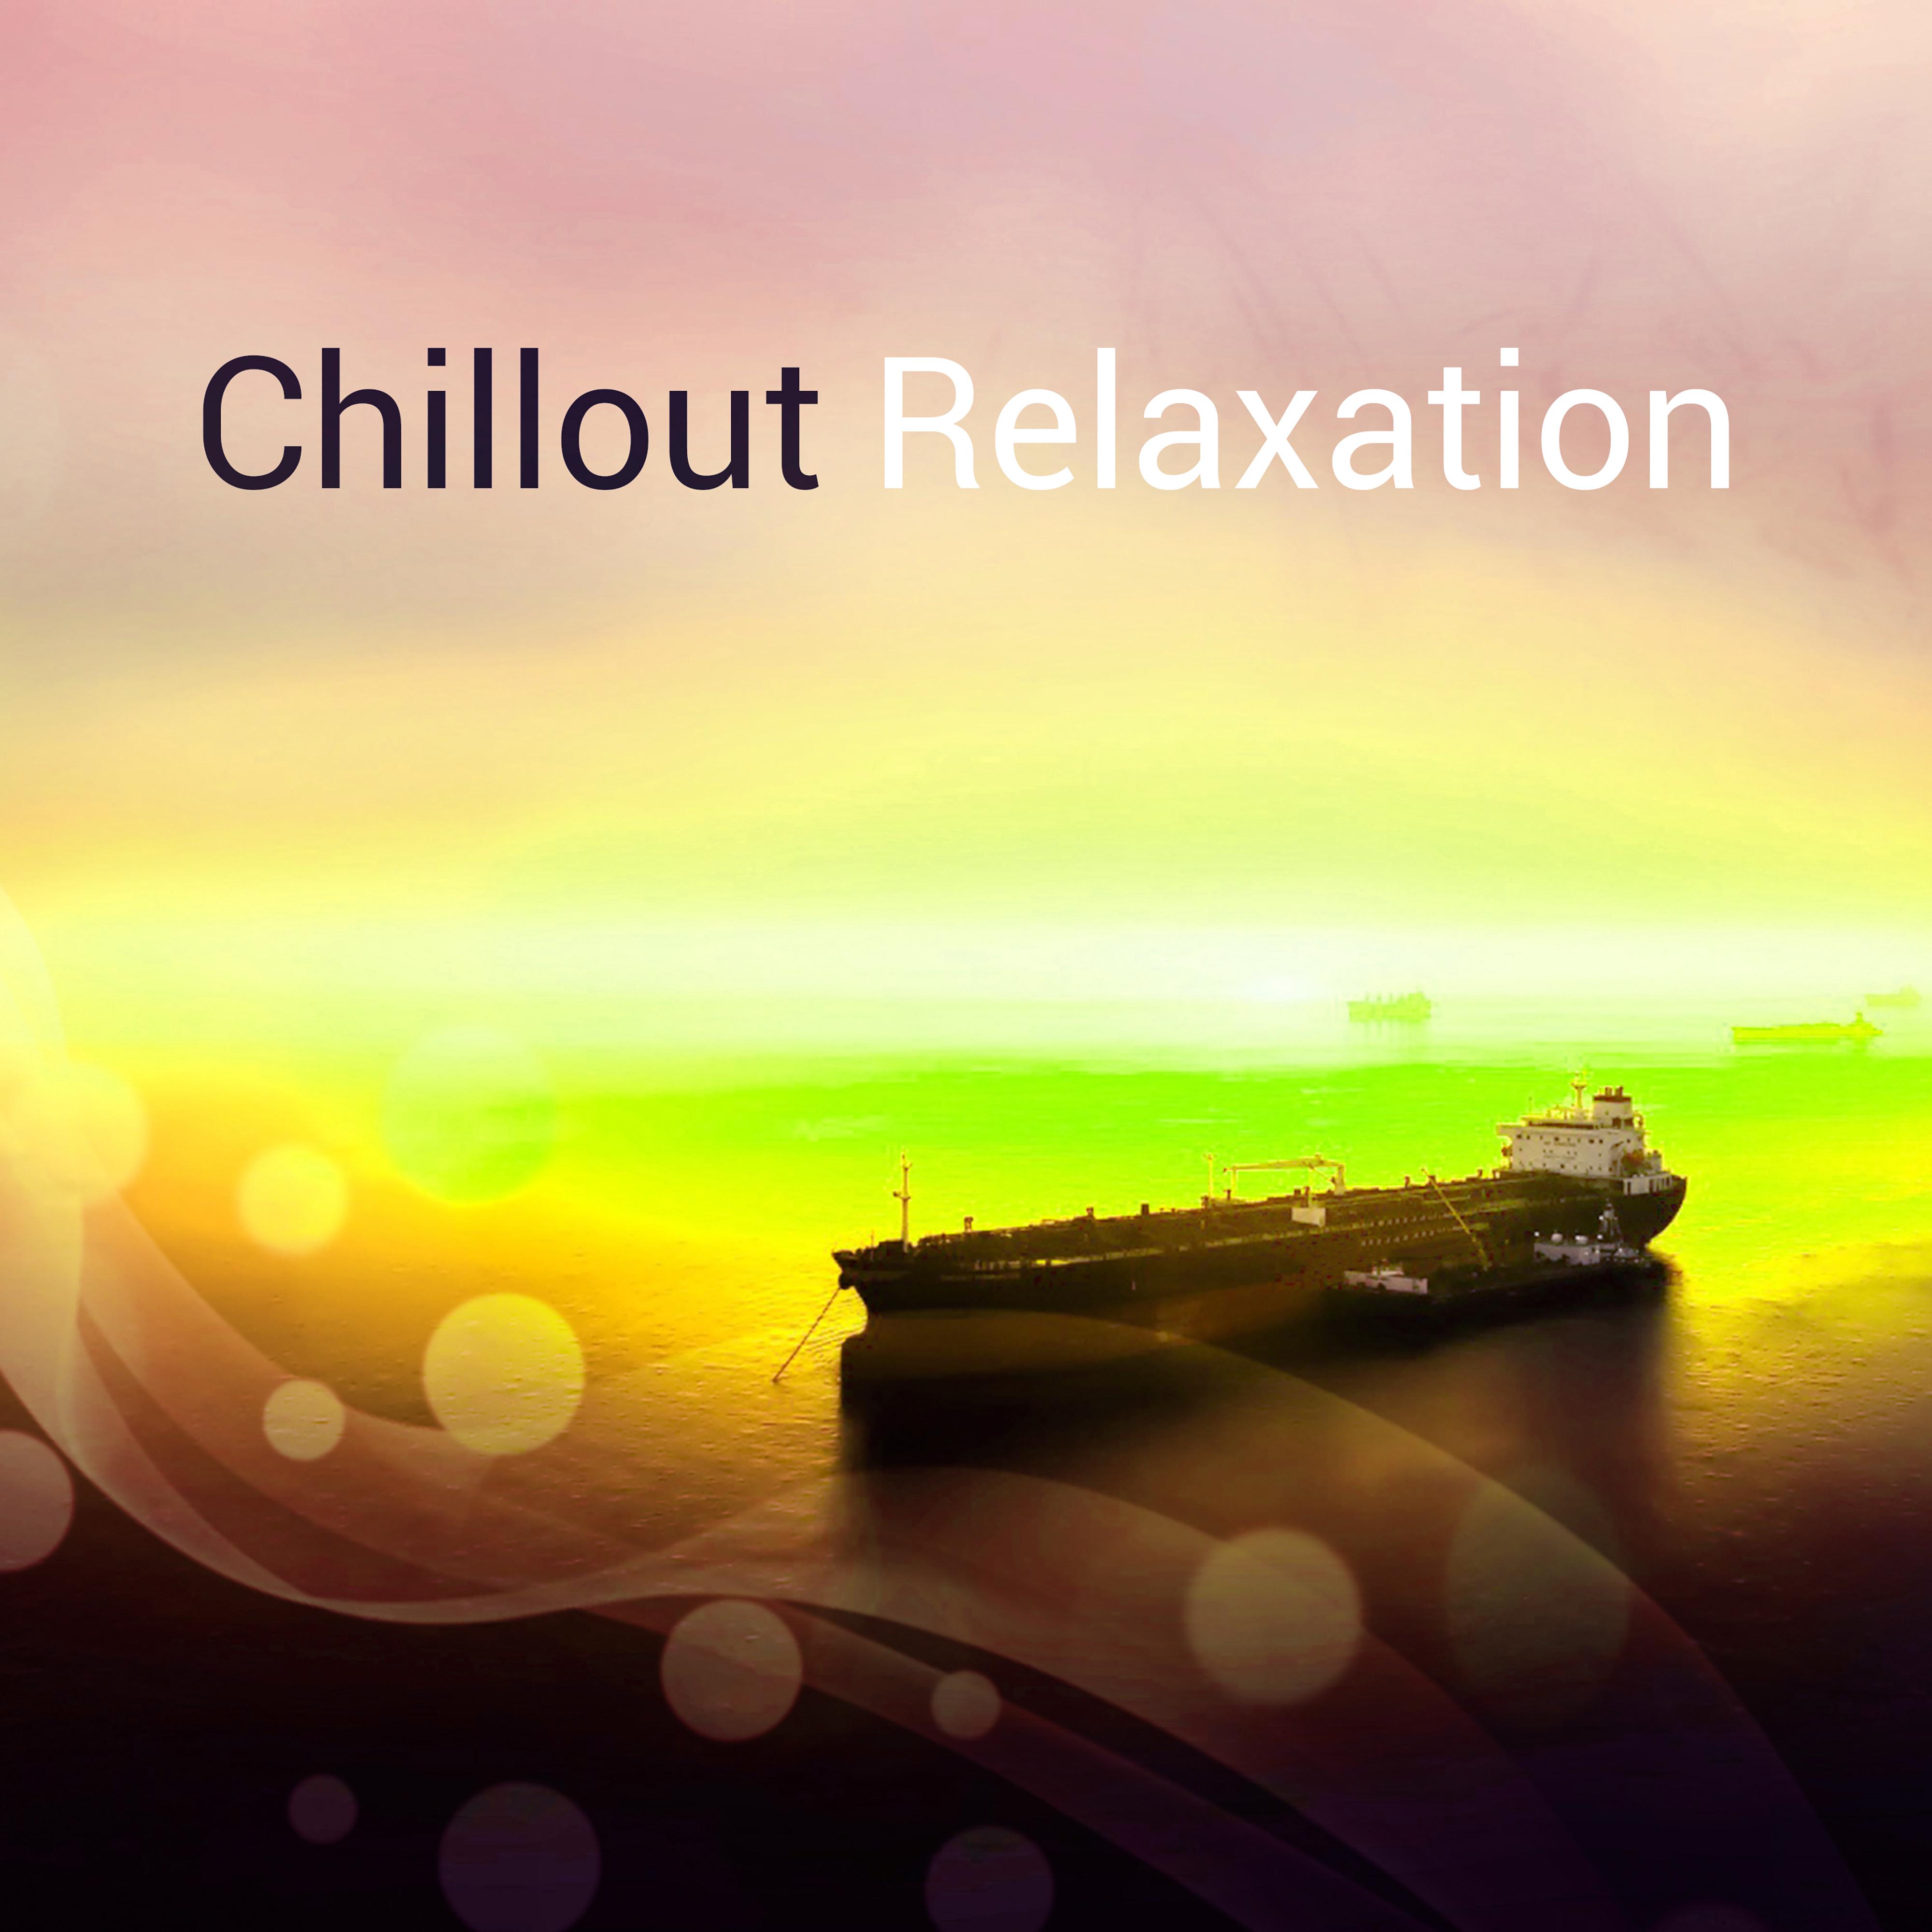 Chillout Relaxation – Chill Out Music, Relax, Rest, Essential, Electronic Vibes